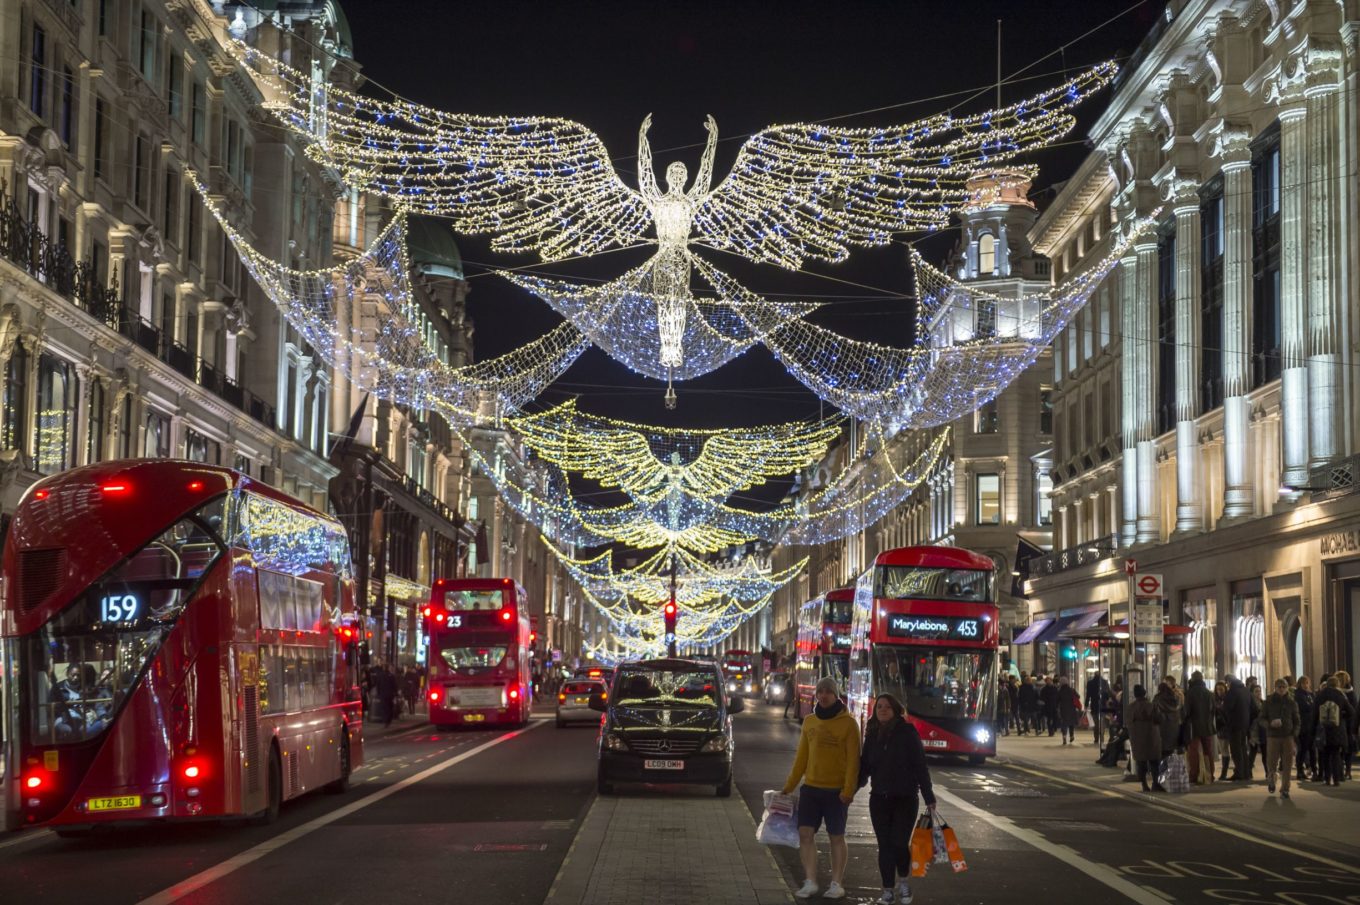 The Best Things To Do At Christmas In London With Kids In 2023 ️